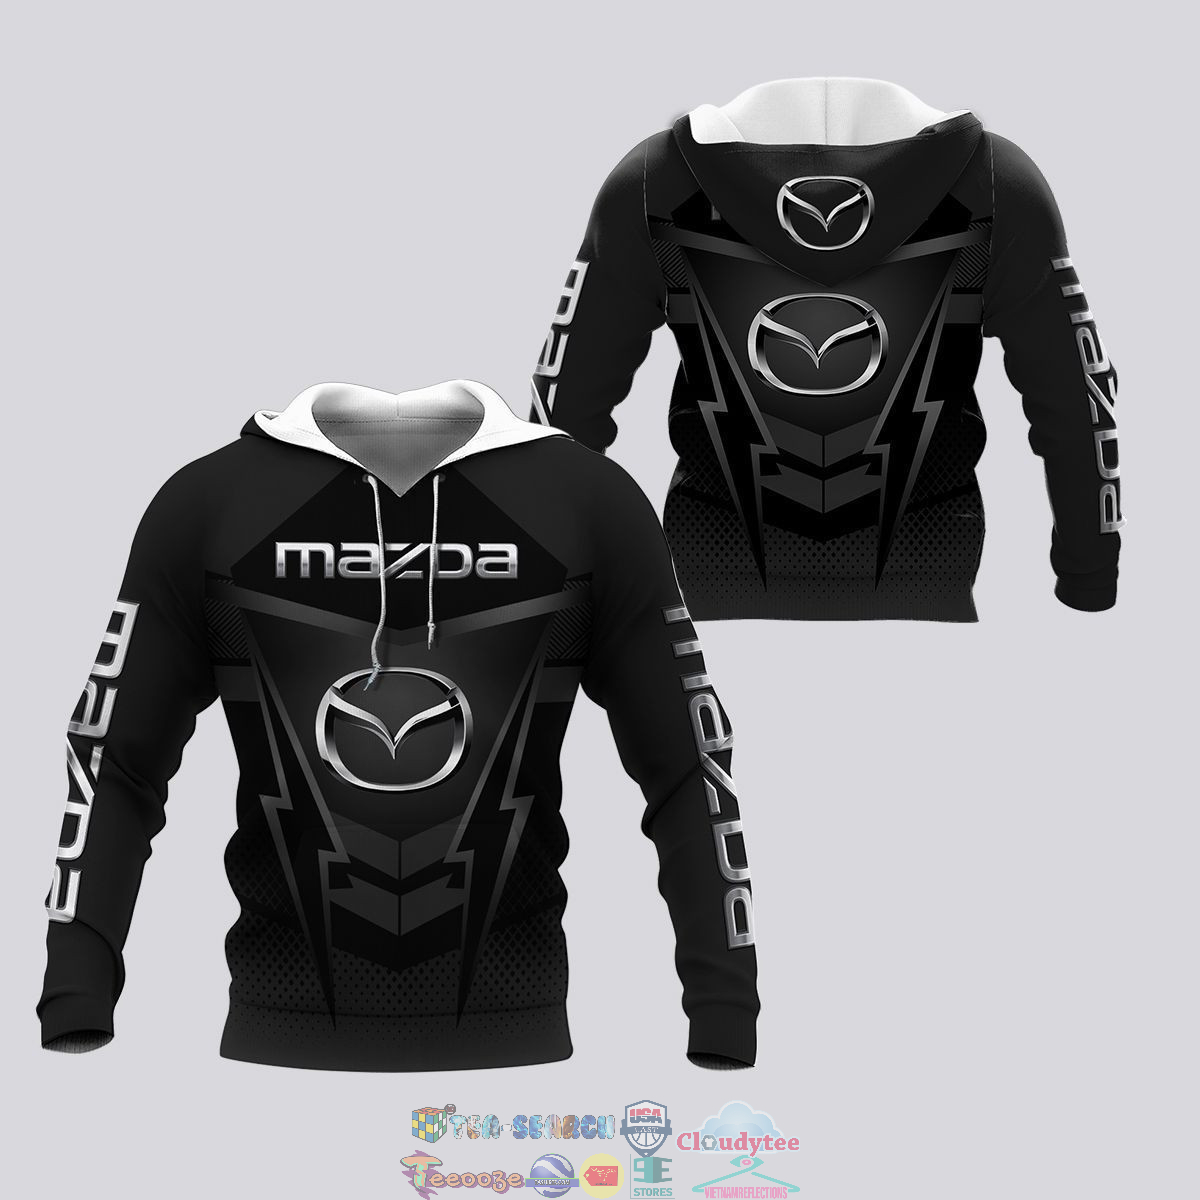 Mazda ver 5 3D hoodie and t-shirt